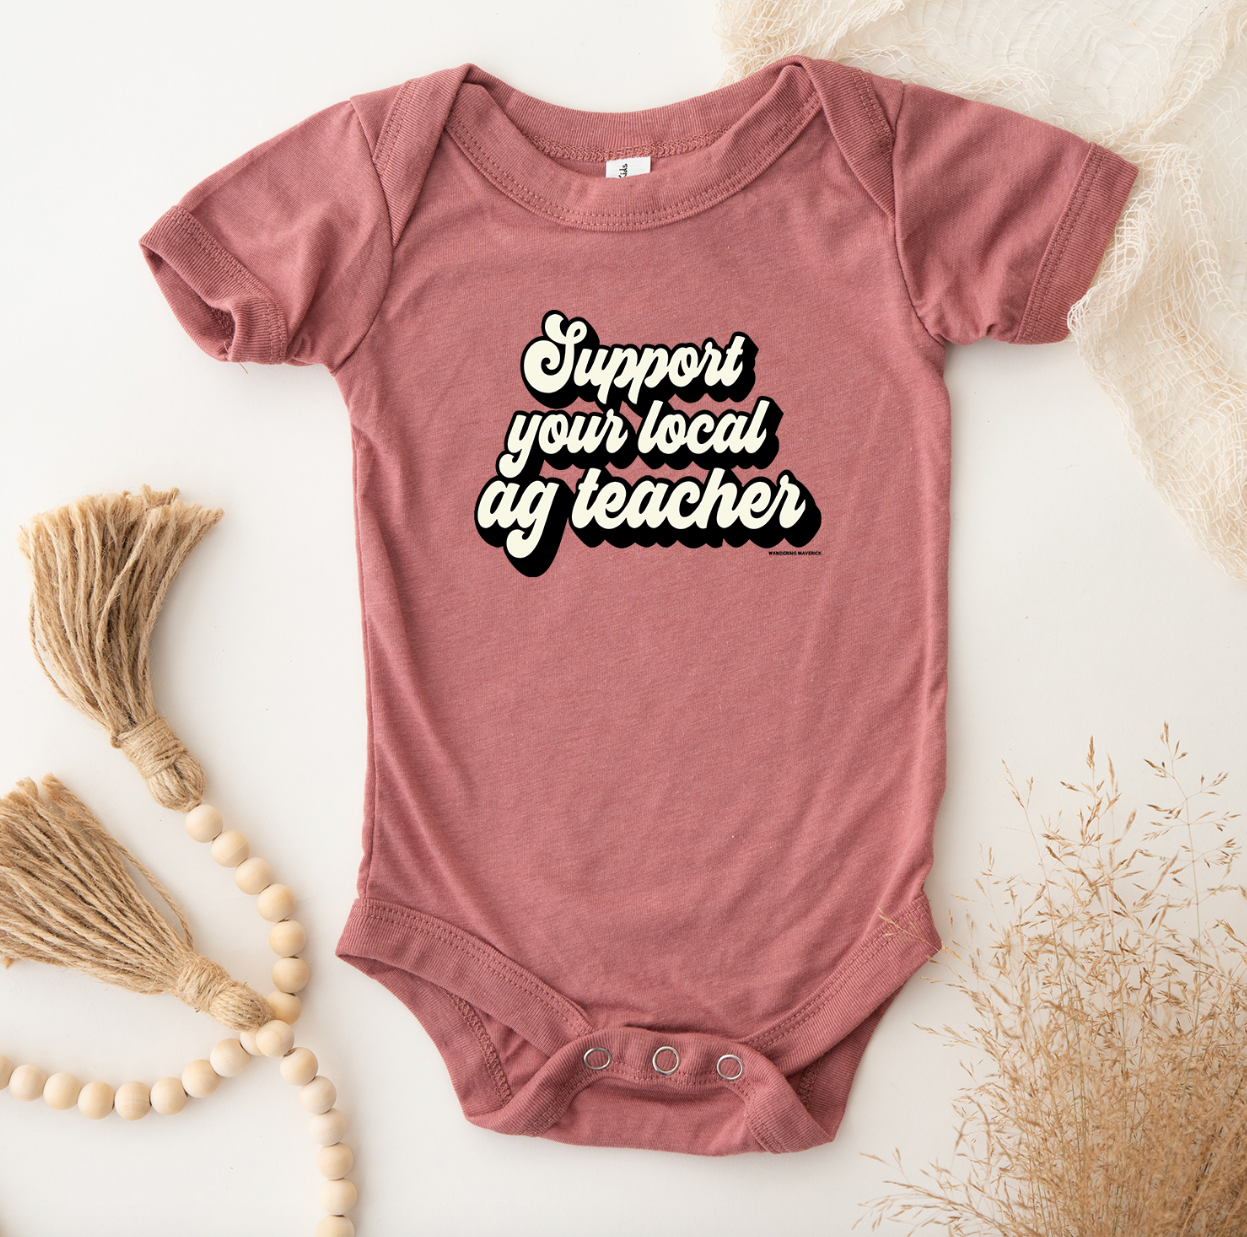 Retro Support Your Local Ag Teacher Black One Piece/T-Shirt (Newborn - Youth XL) - Multiple Colors!